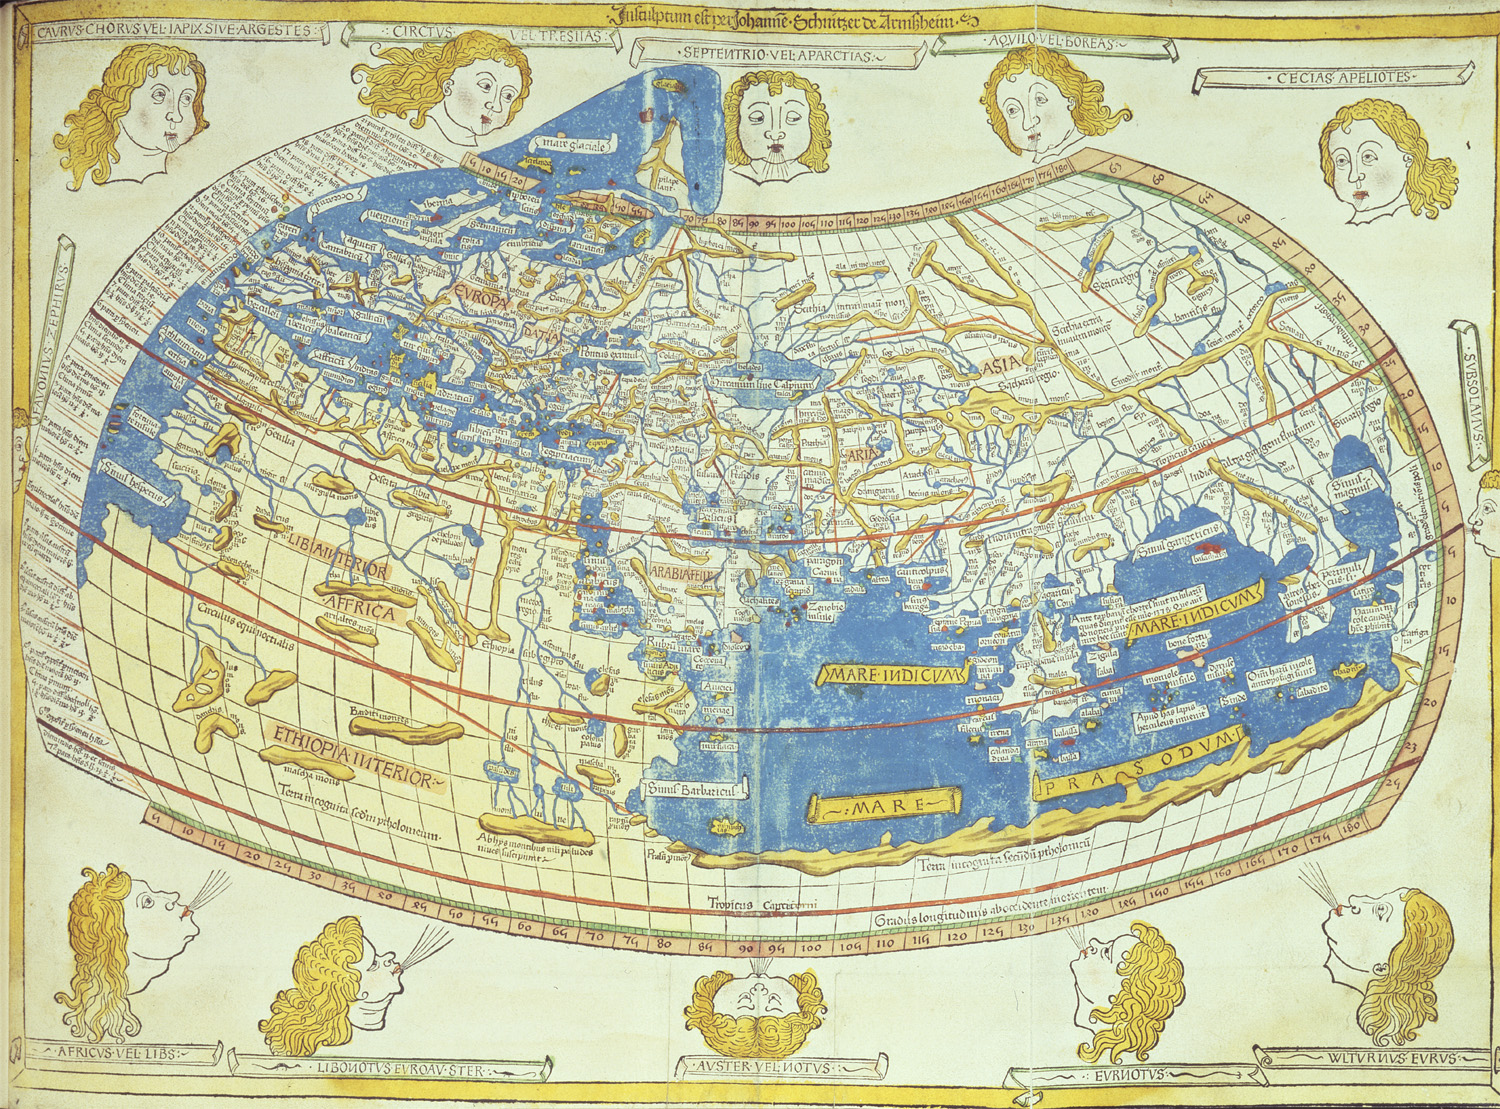 Reproduction woodcut of Ptolemy's (90-168 CE) map of the world by Johane Schnitzer (Ulm: Leinhart Holle, 1482). The original map was lost.